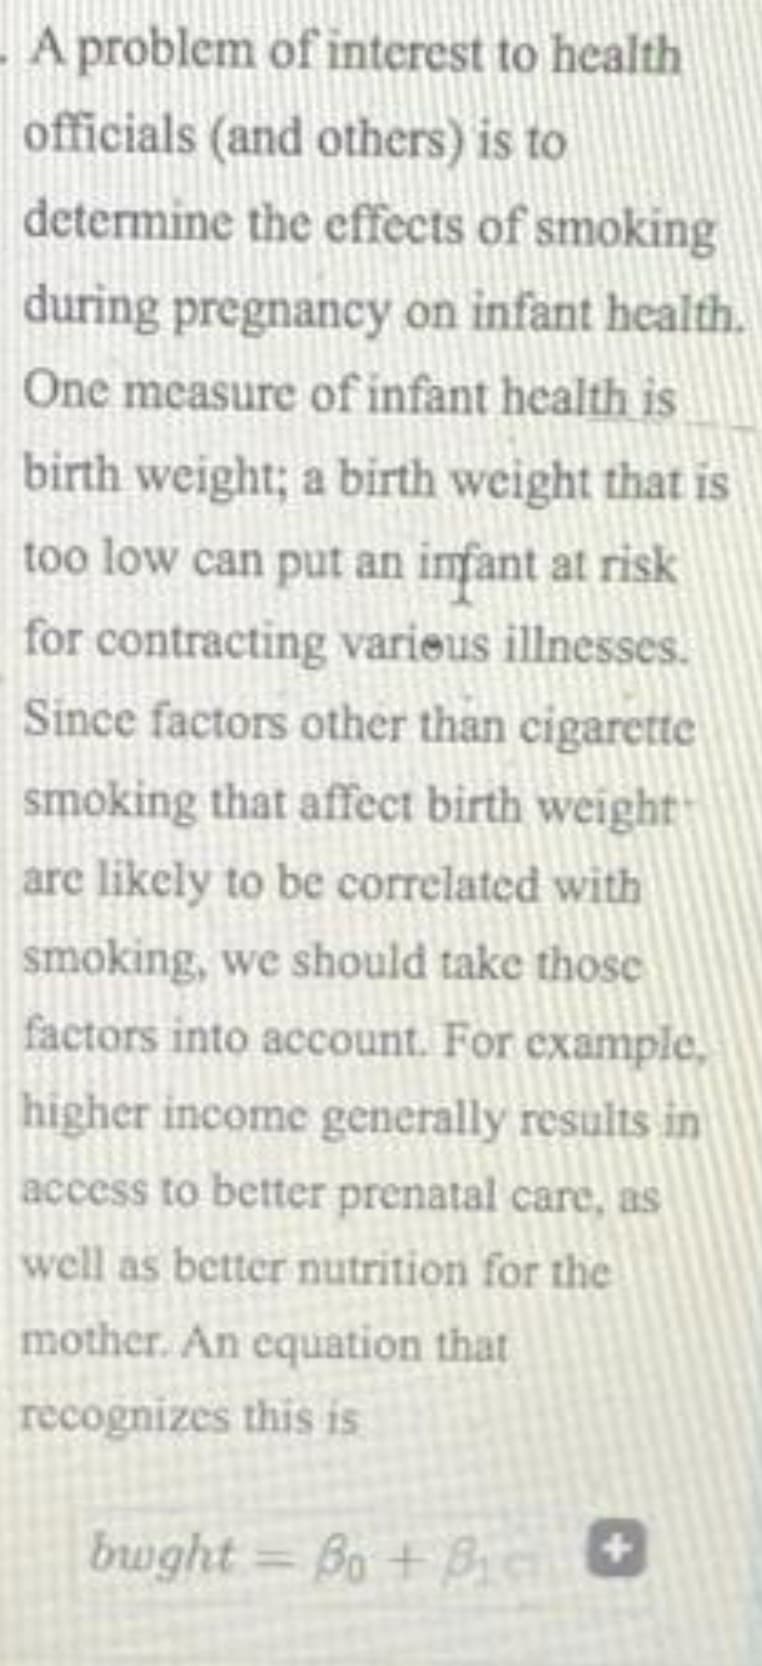 A problem of interest to health
officials (and others) is to
determine the effects of smoking
during pregnancy on infant health.
One measure of infant health is
birth weight; a birth weight that is
too low can put an imfant at risk
for contracting varieus illnesses.
Since factors other than cigarette
smoking that affect birth weight
are likely to be correlated with
smoking, we should take those
factors into account. For example,
higher income generally results in
access to better prenatal care, as
well as better nutrition for the
mother. An equation that
recognizes this is
bwght = Bo + B
